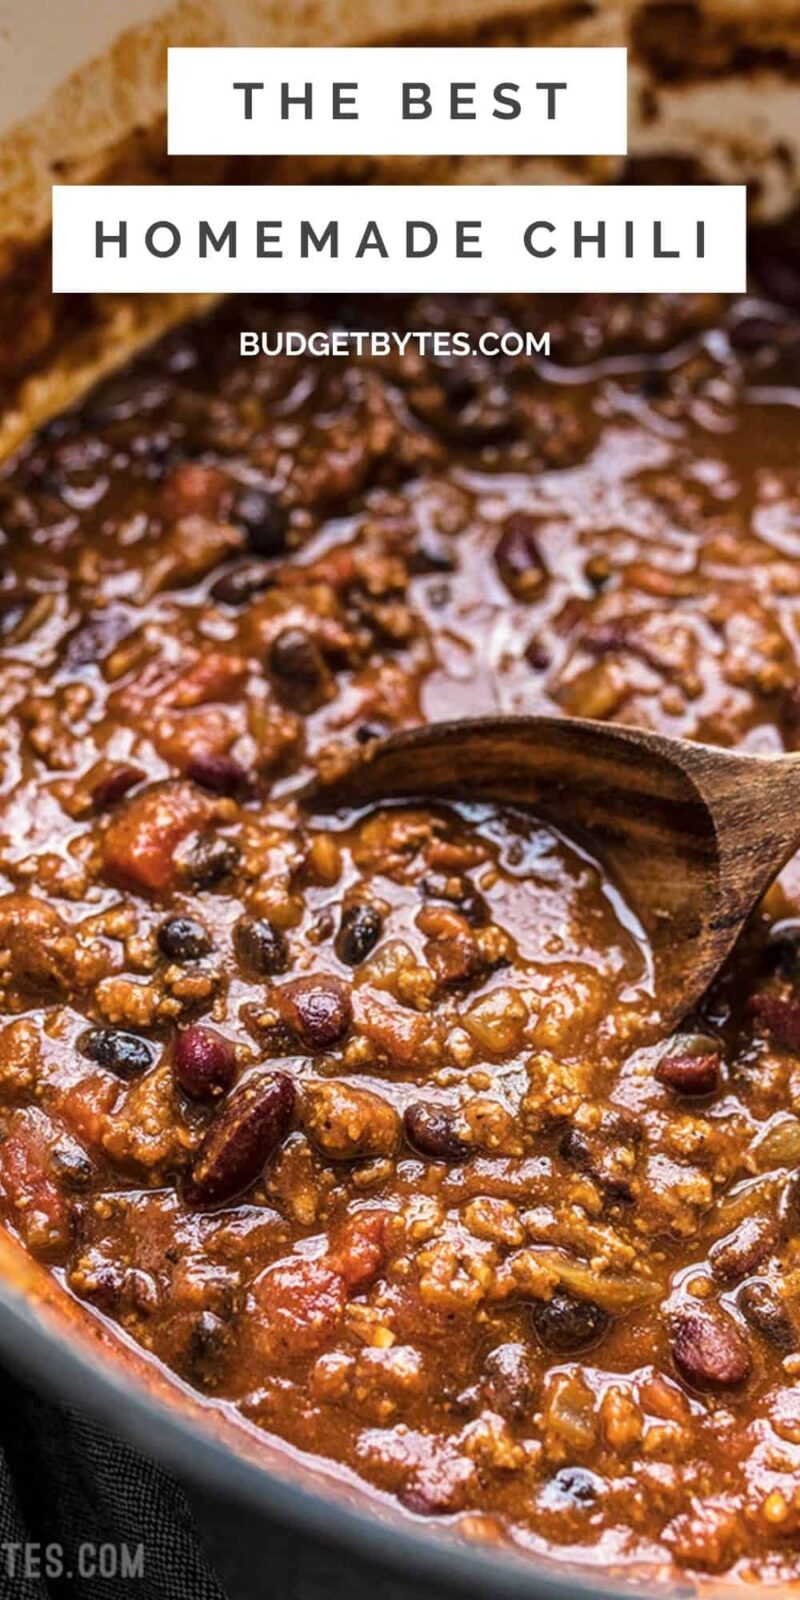 Close up of a pot of chili, title text at the top